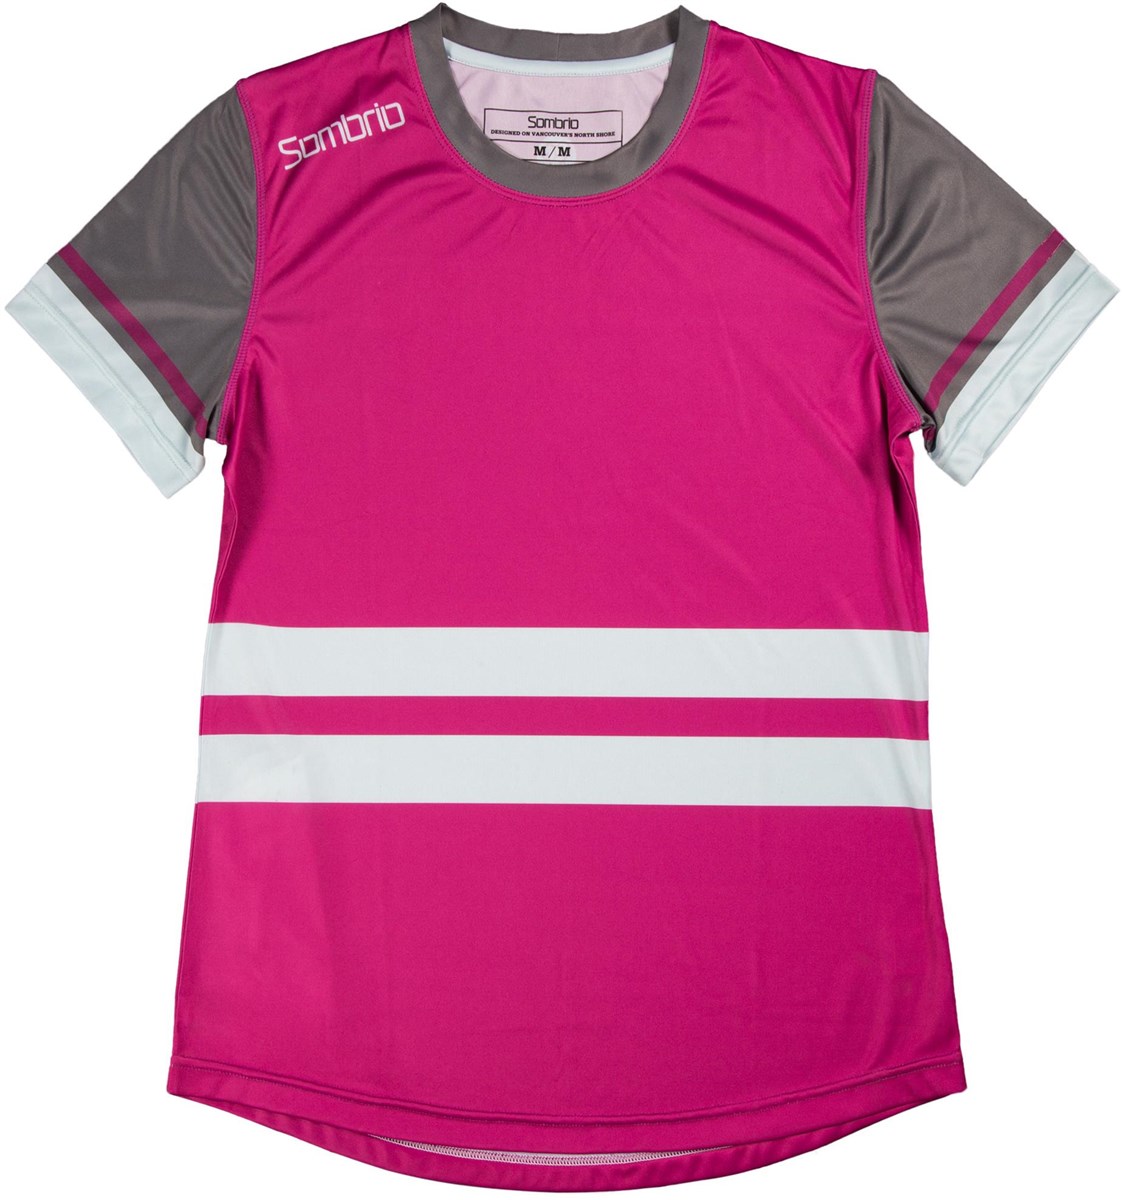 Sombrio Womens Slice n Dice Short Sleeve Cycling Jersey SS16 product image